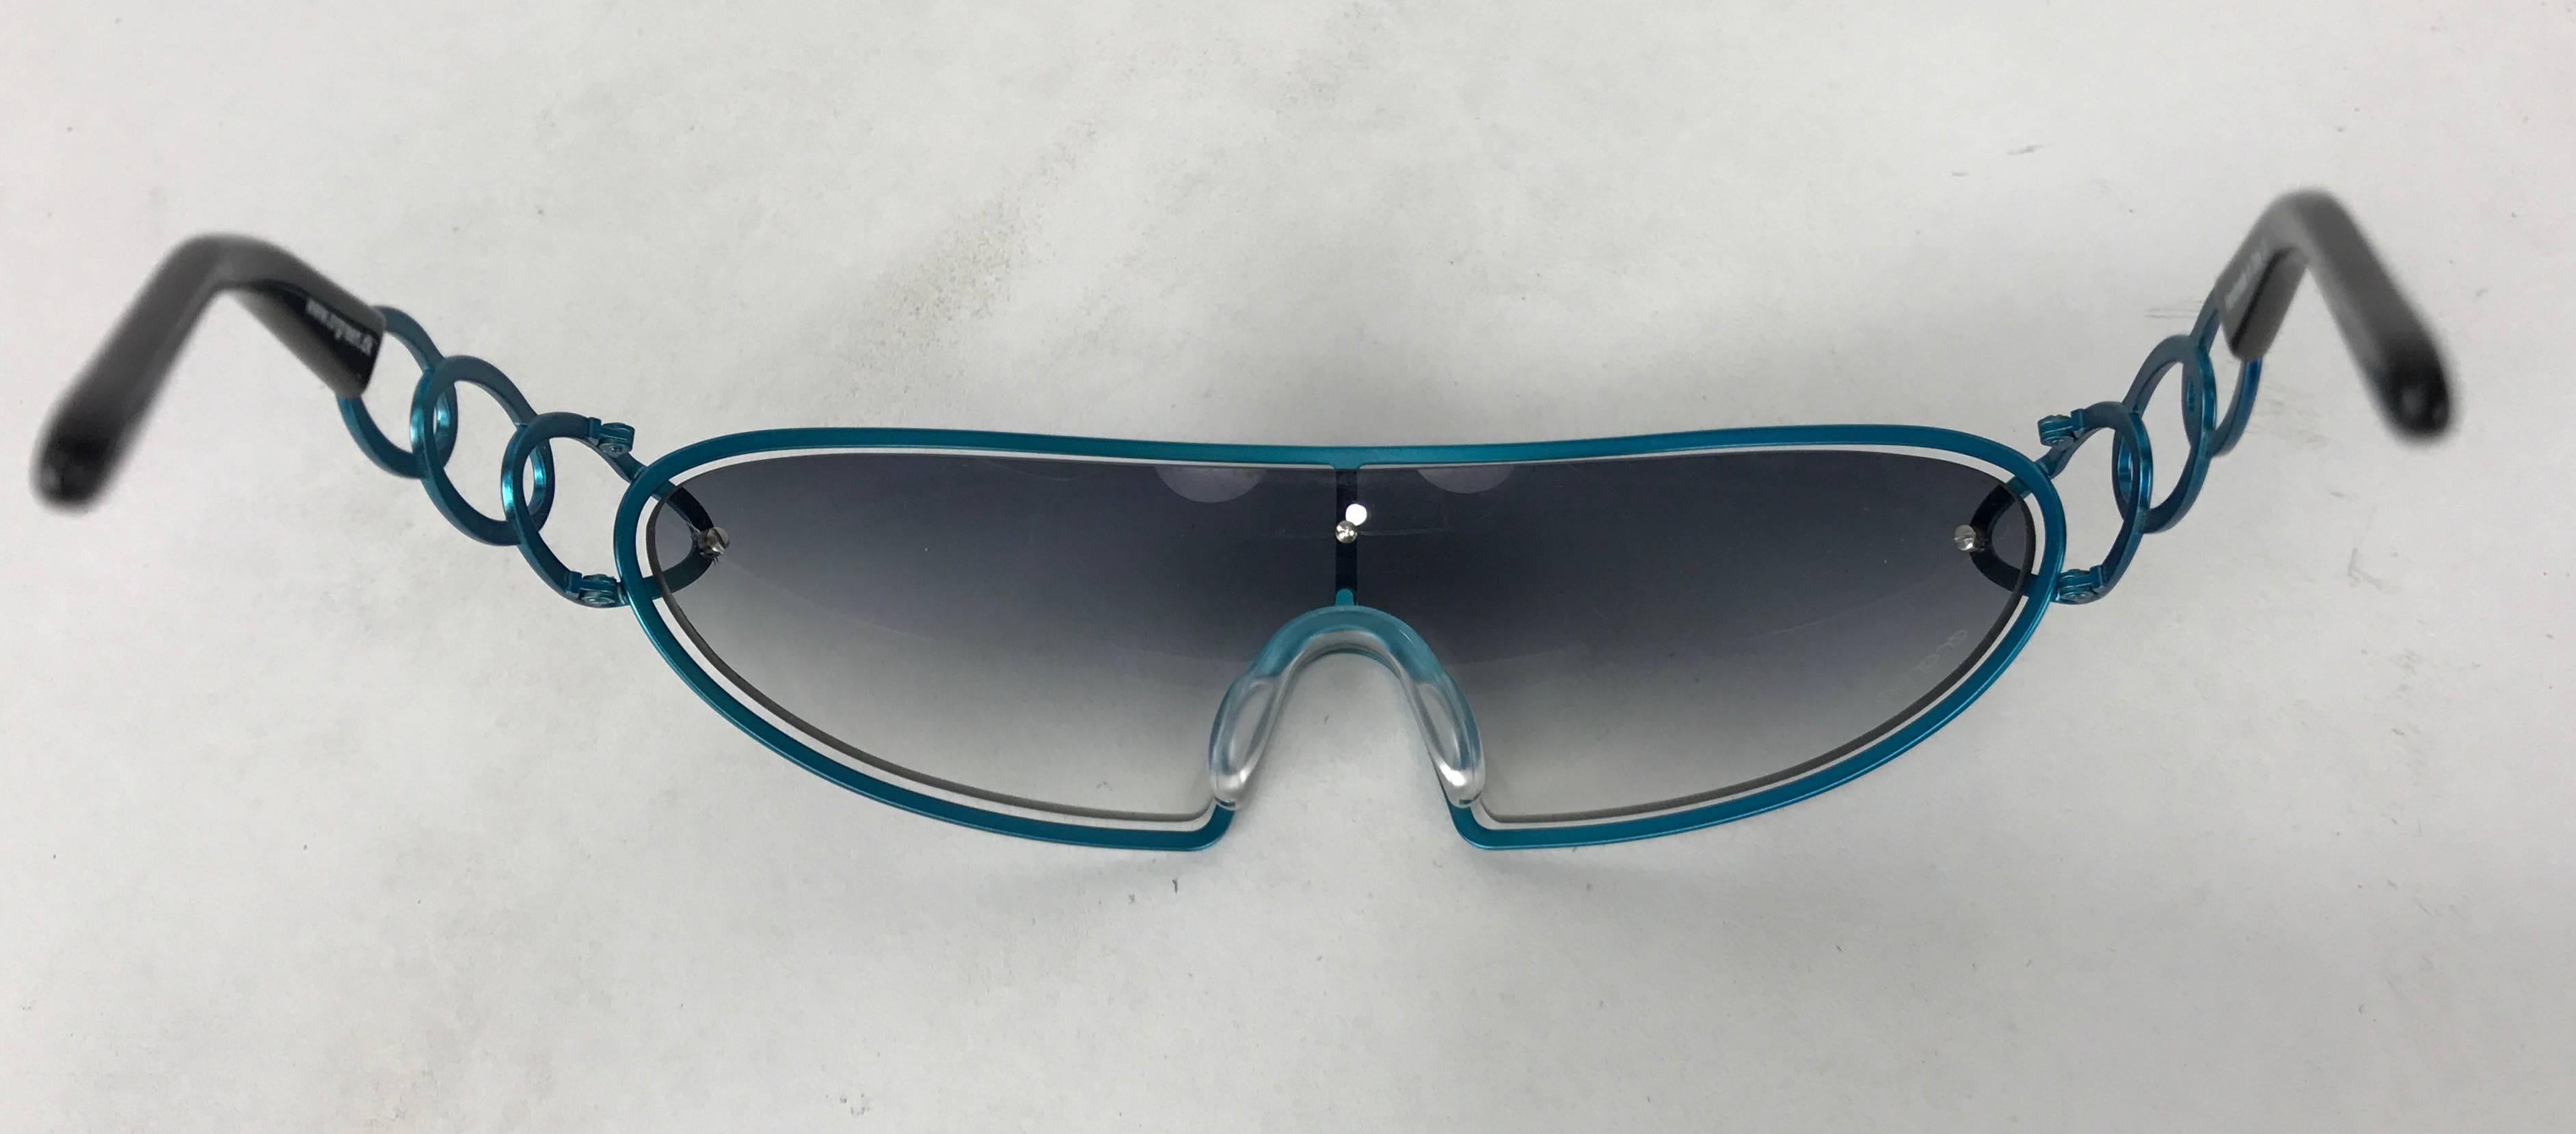 Italian Iconic Orgreen Titanium Frame Sunglasses, Vintage Eyewear Made in Italy For Sale